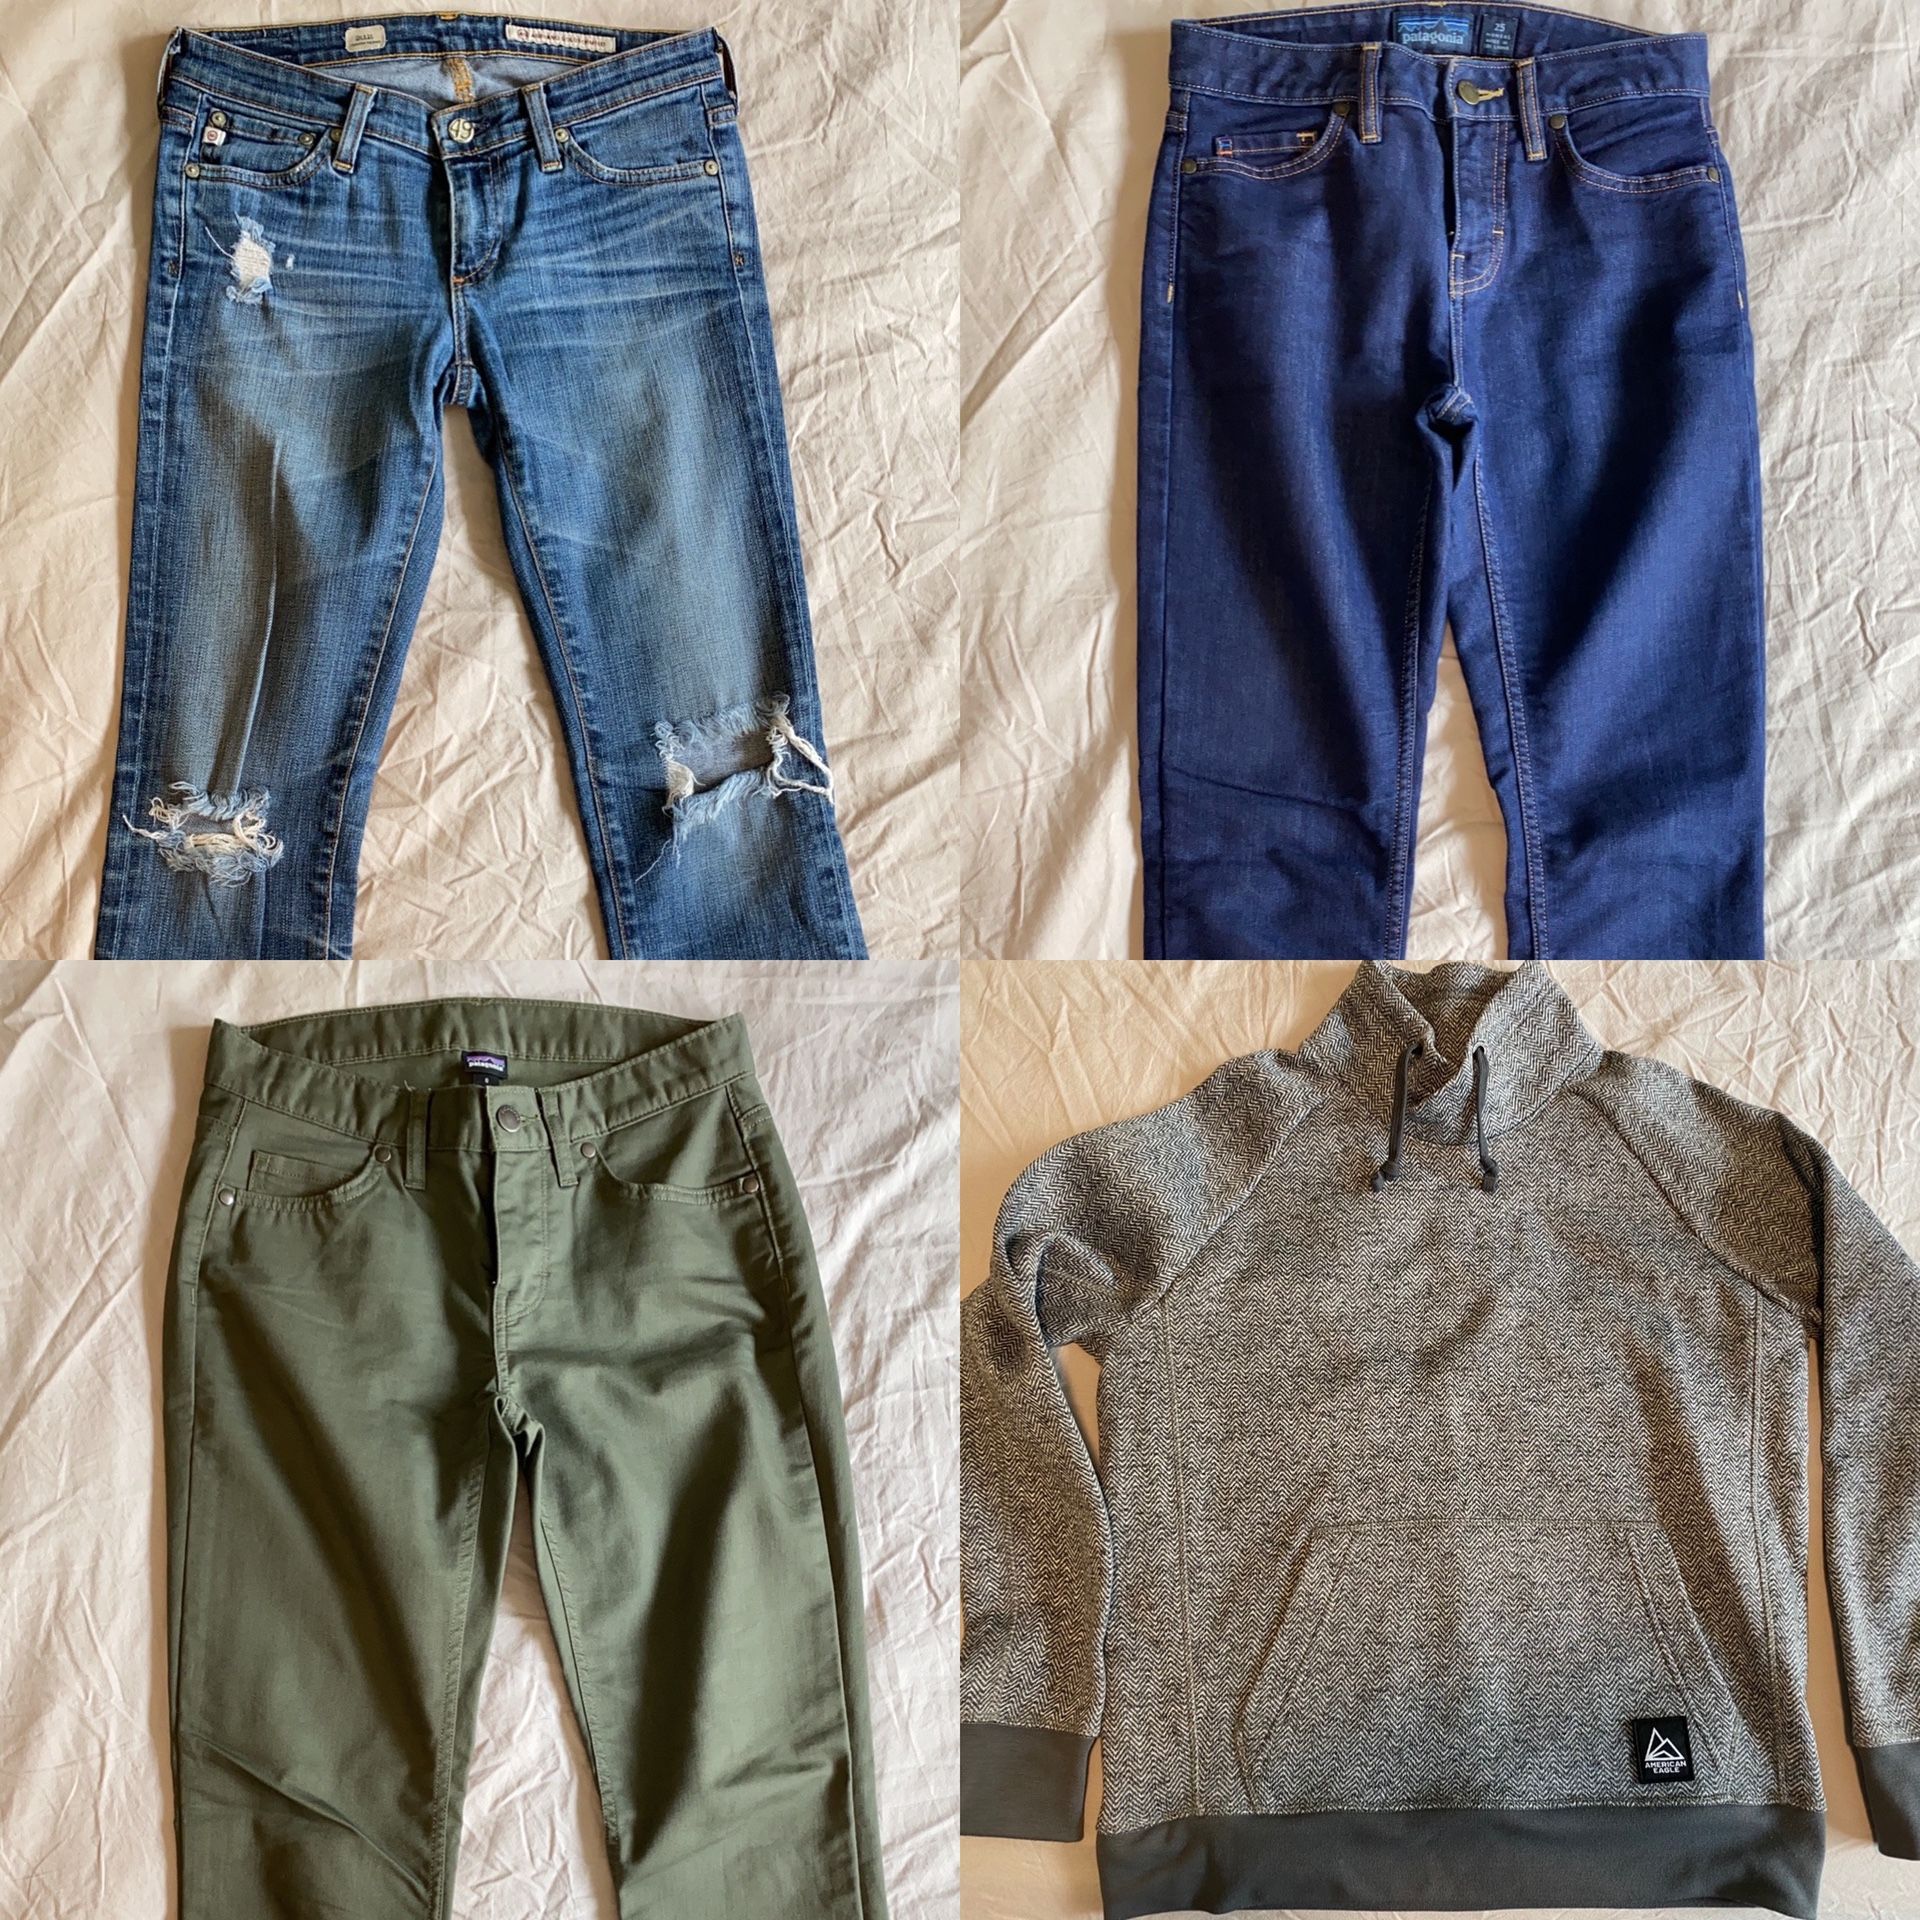 Women’s Clothing- AE, Patagonia and AG